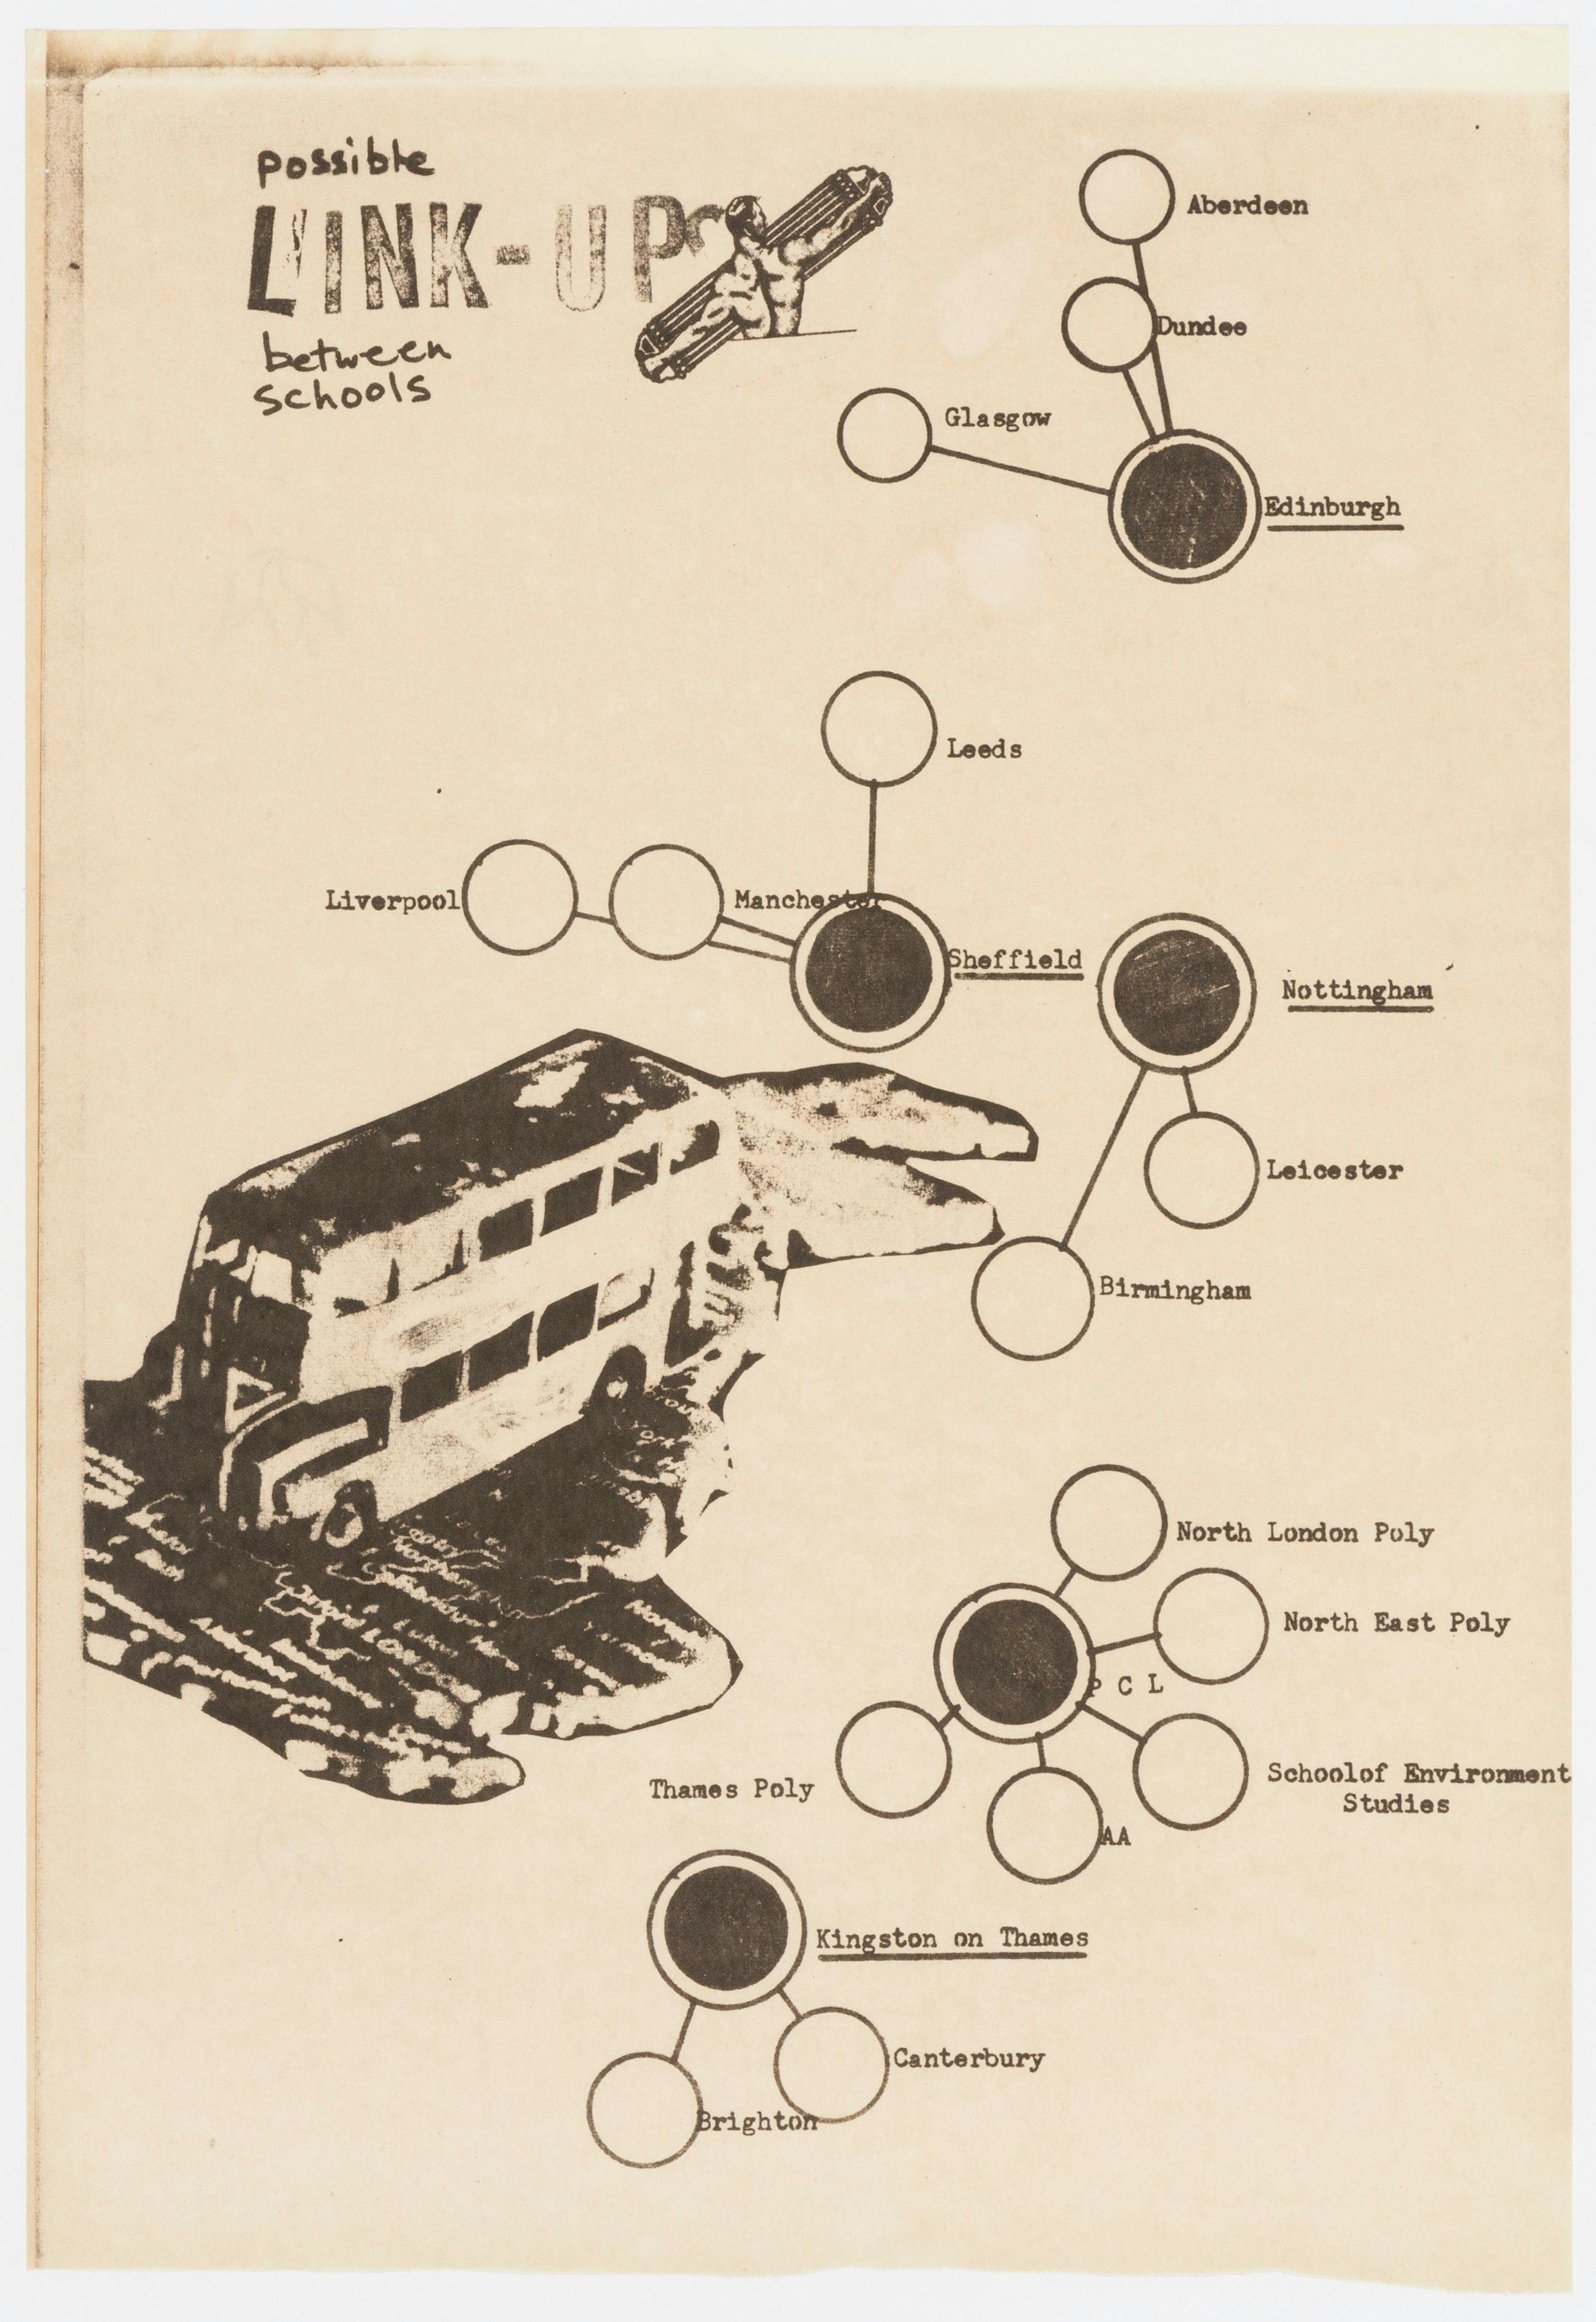  Cedric Price. Drawing of the bus tour circuit indicating participating architecture schools and their potential connections, 1973. AD/AA/Polyark. Cedric Price Fund, CCA. © Peter Murray. 